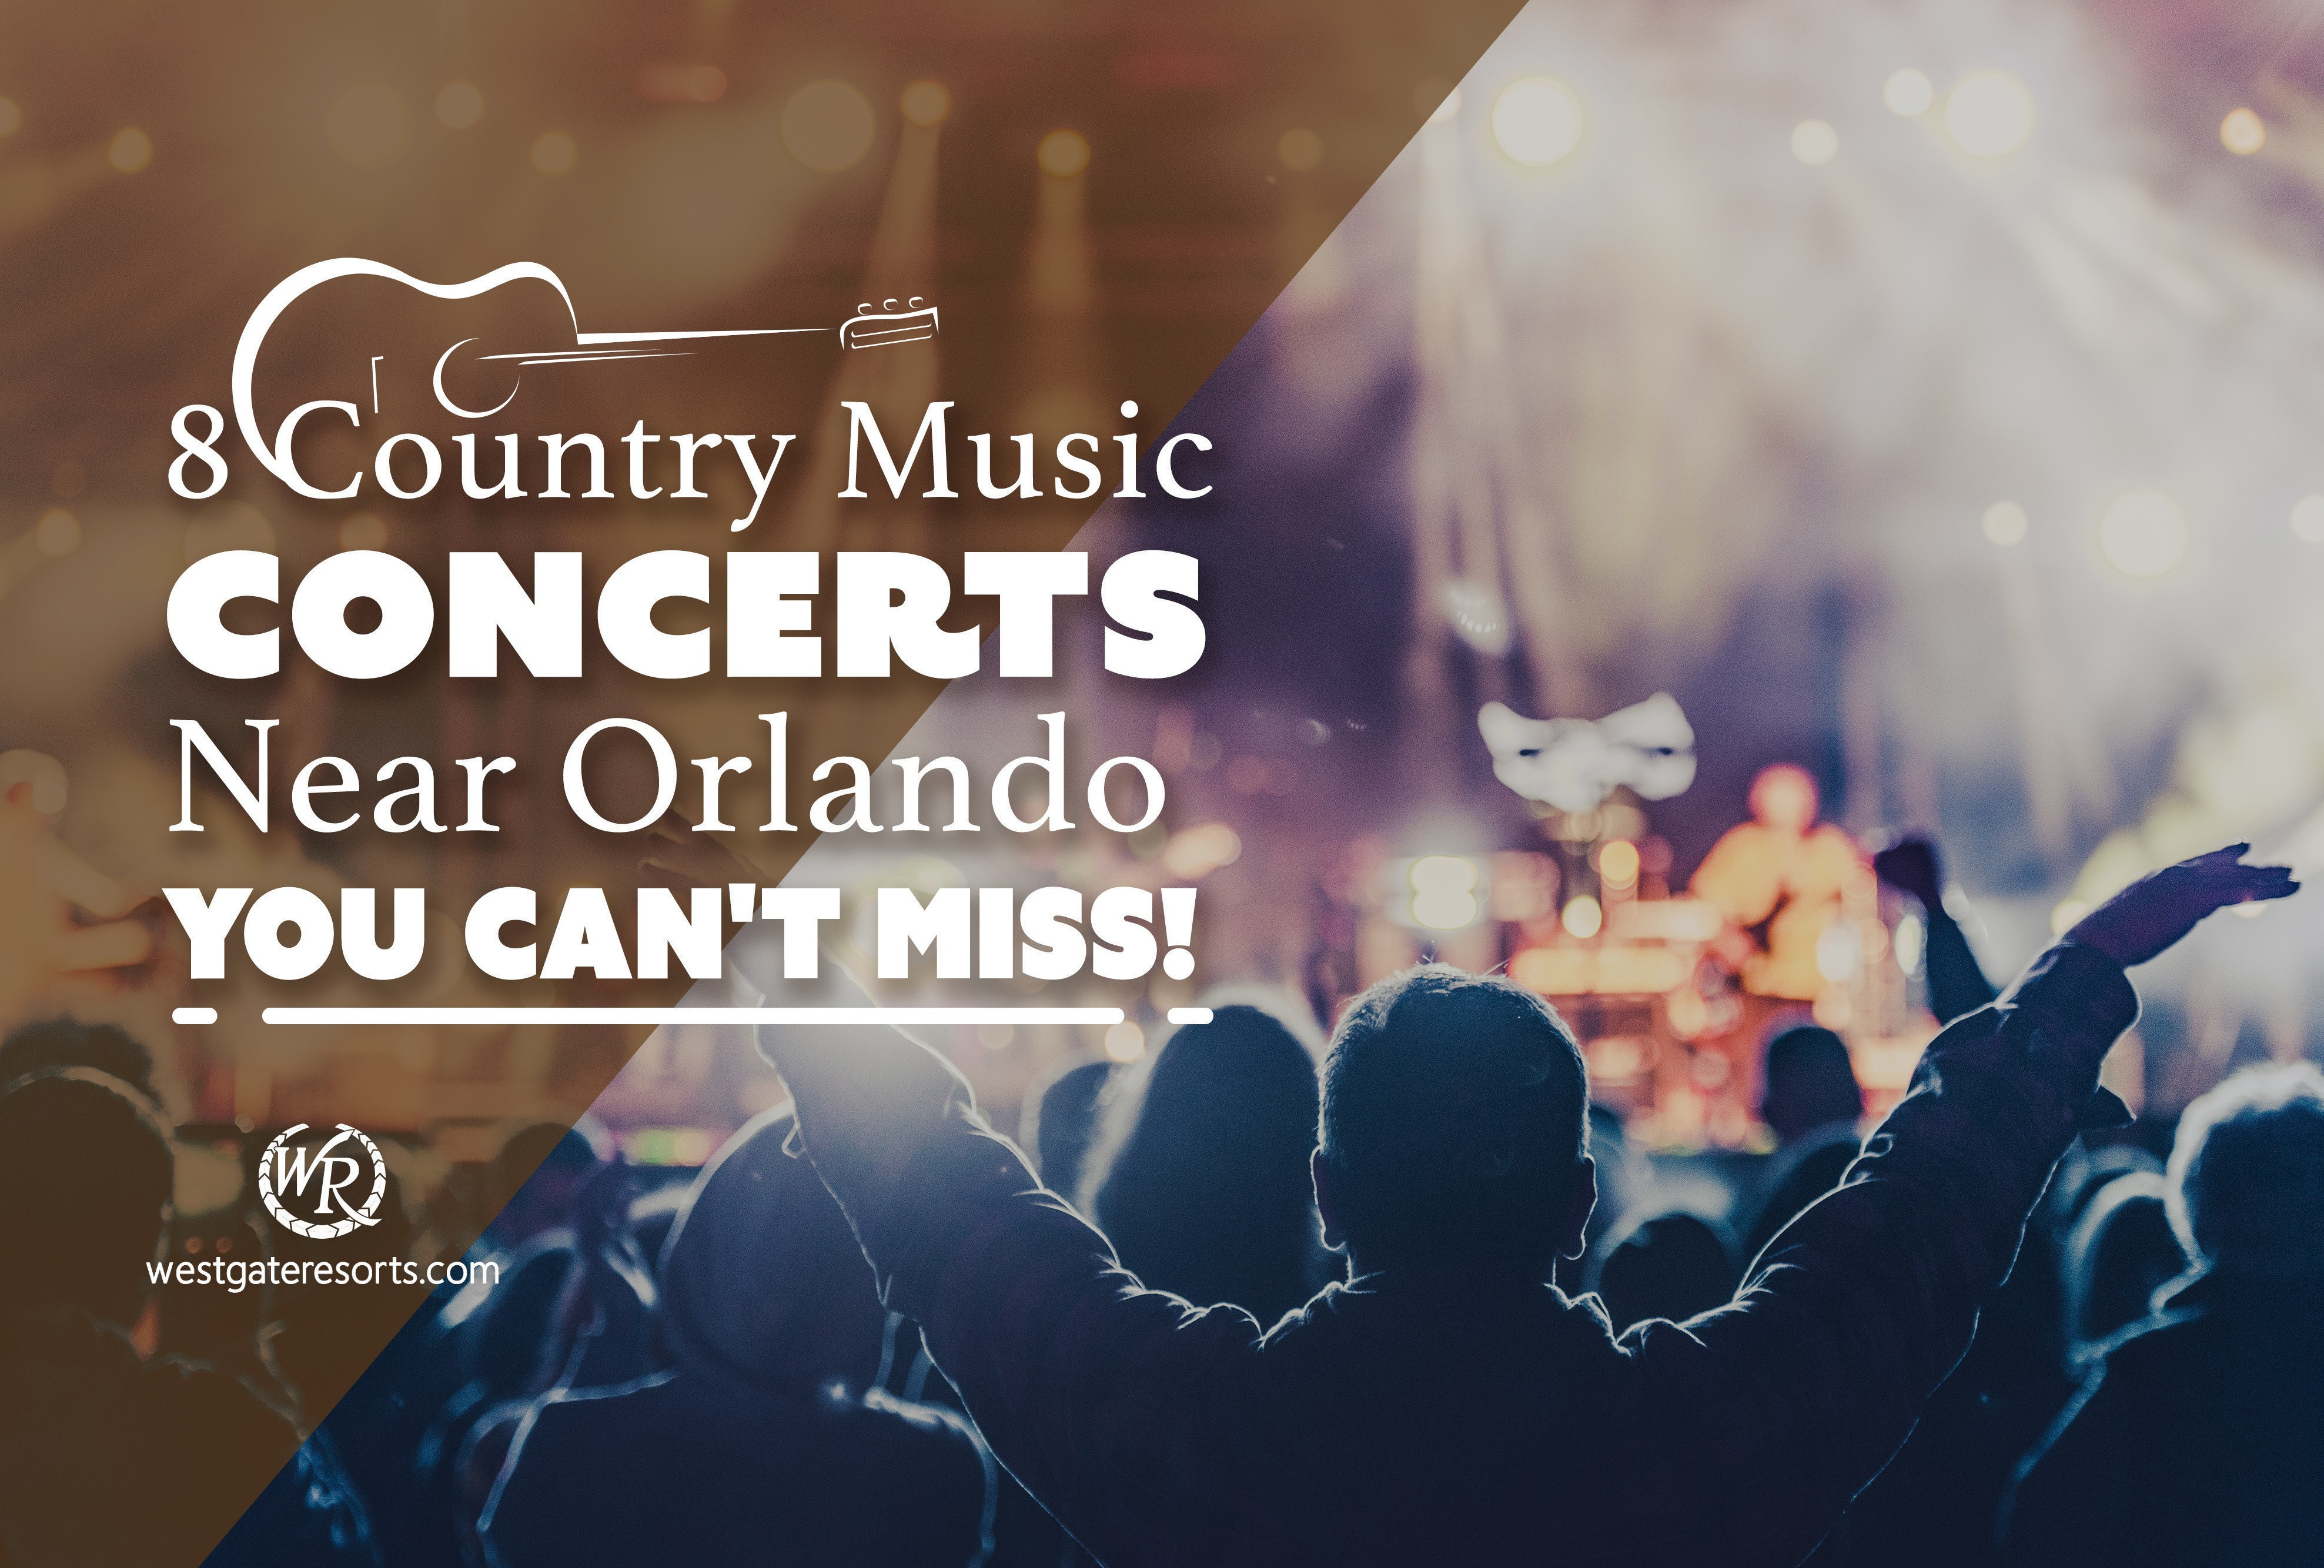 8 Country Music Concerts Near Orlando You Can't Miss!